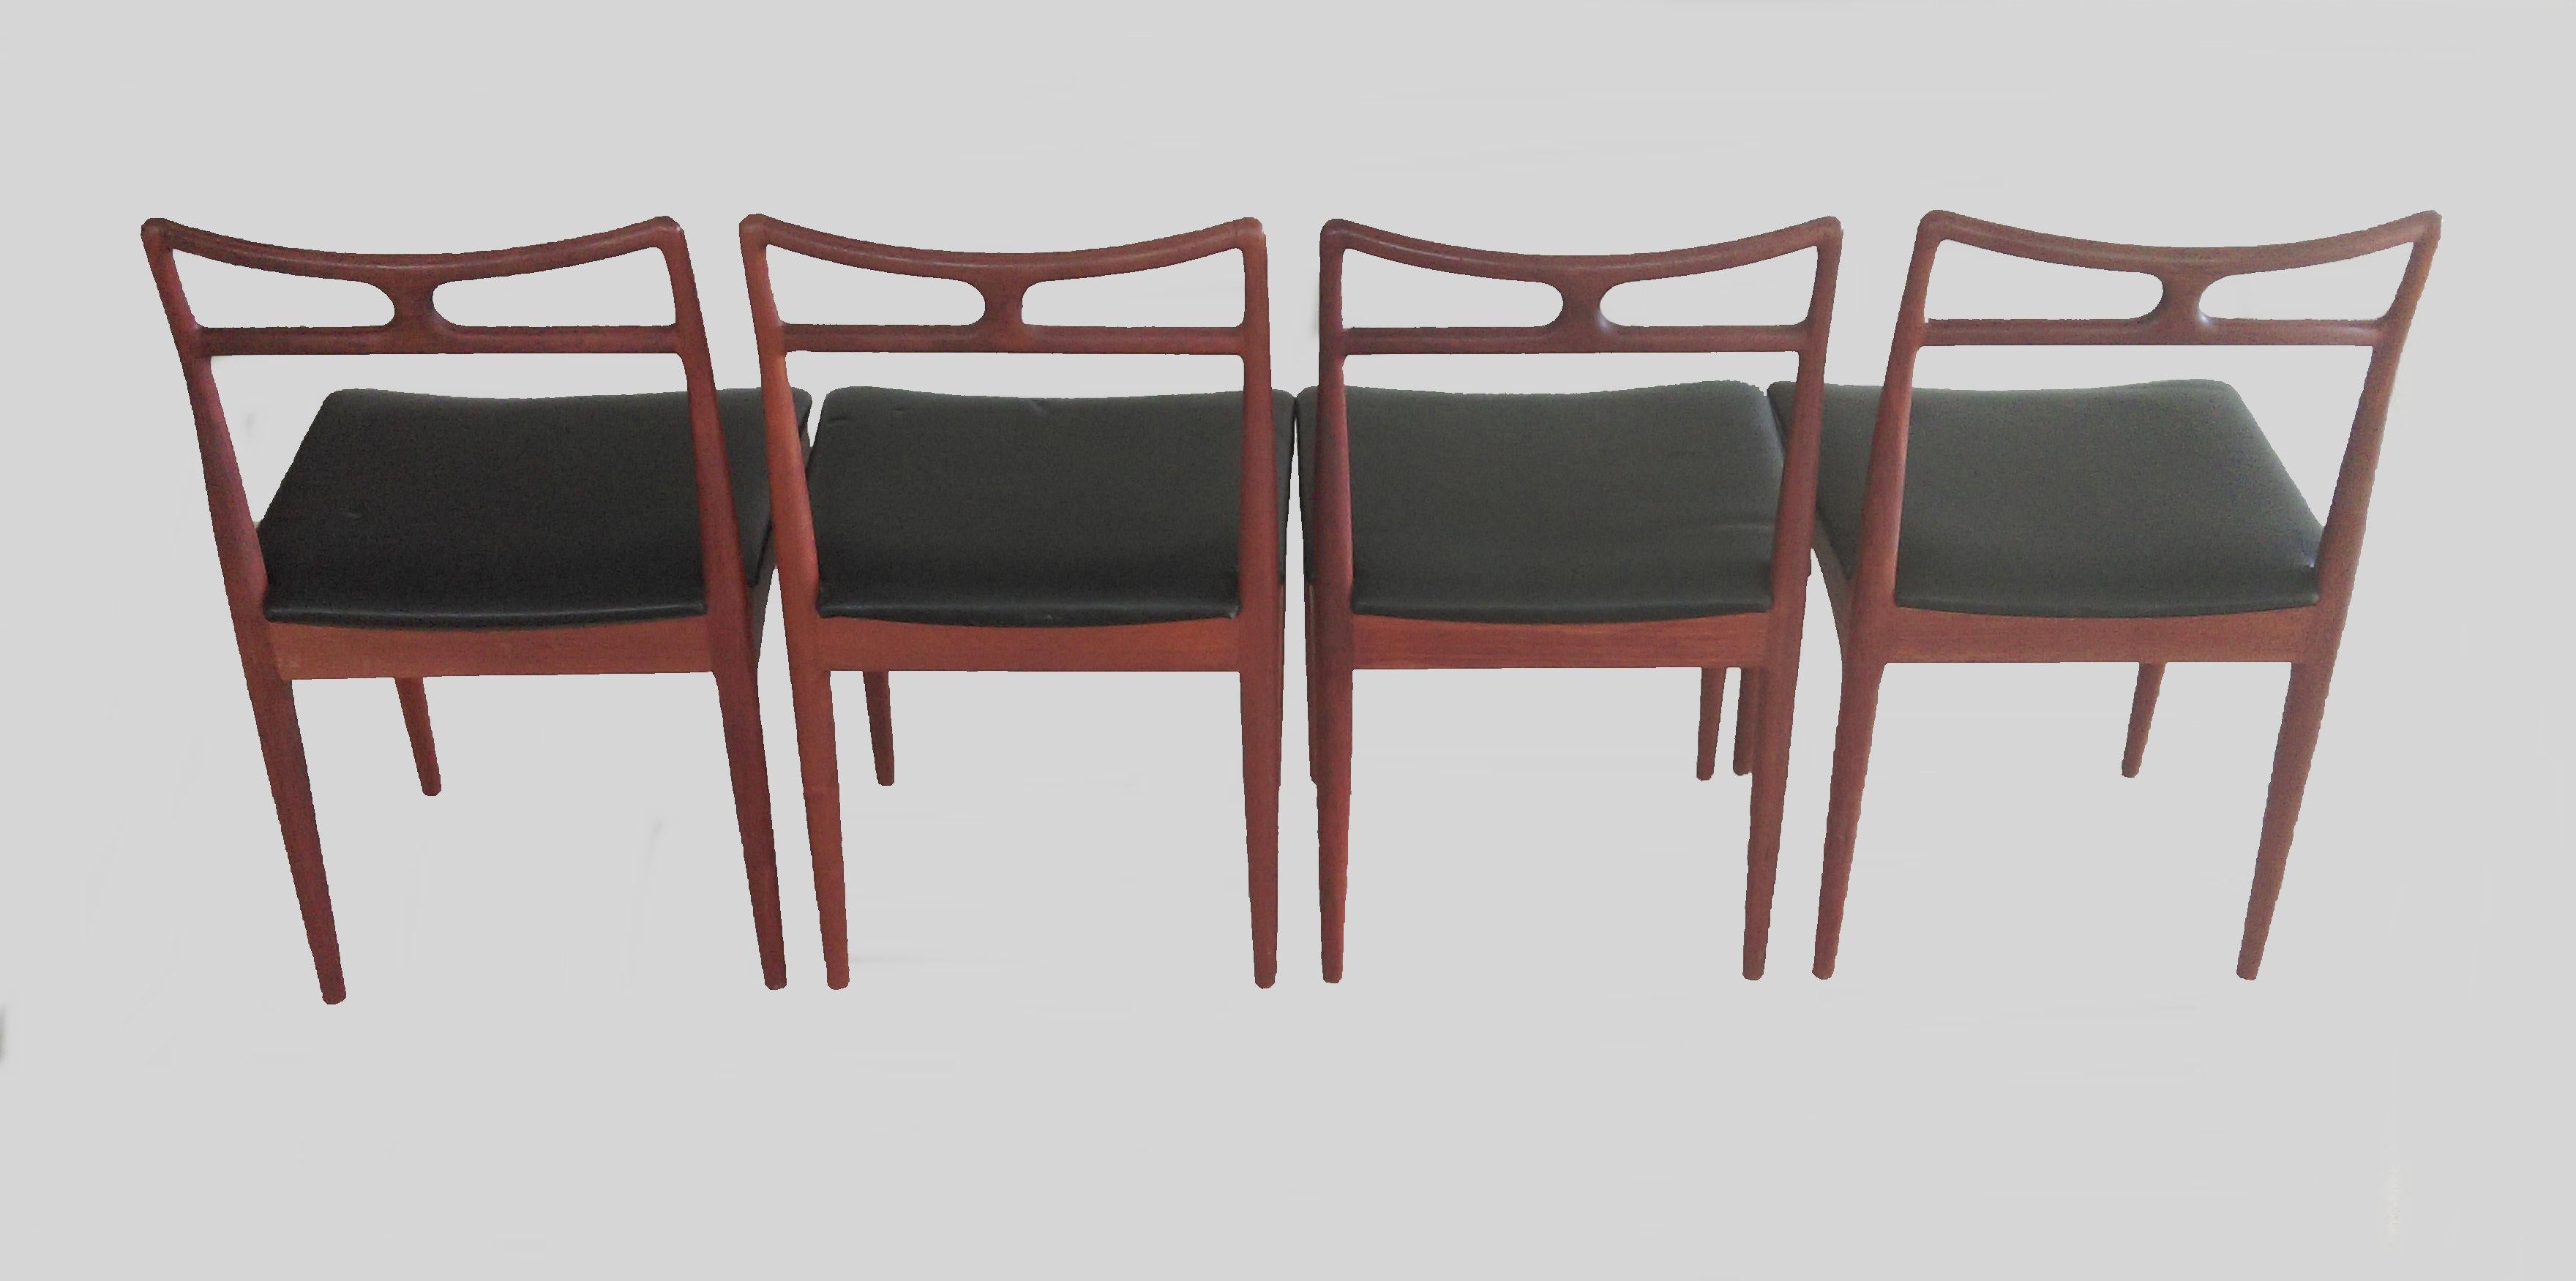 Set of four Danish Johannes Andersen dining chairs in teak by Chr. Linnebergs Møbelfabrik 

The comfortable organic designed chairs features carefully shaped teak frame with lots of organic shapes, creating a light and elegant chair.

The chairs